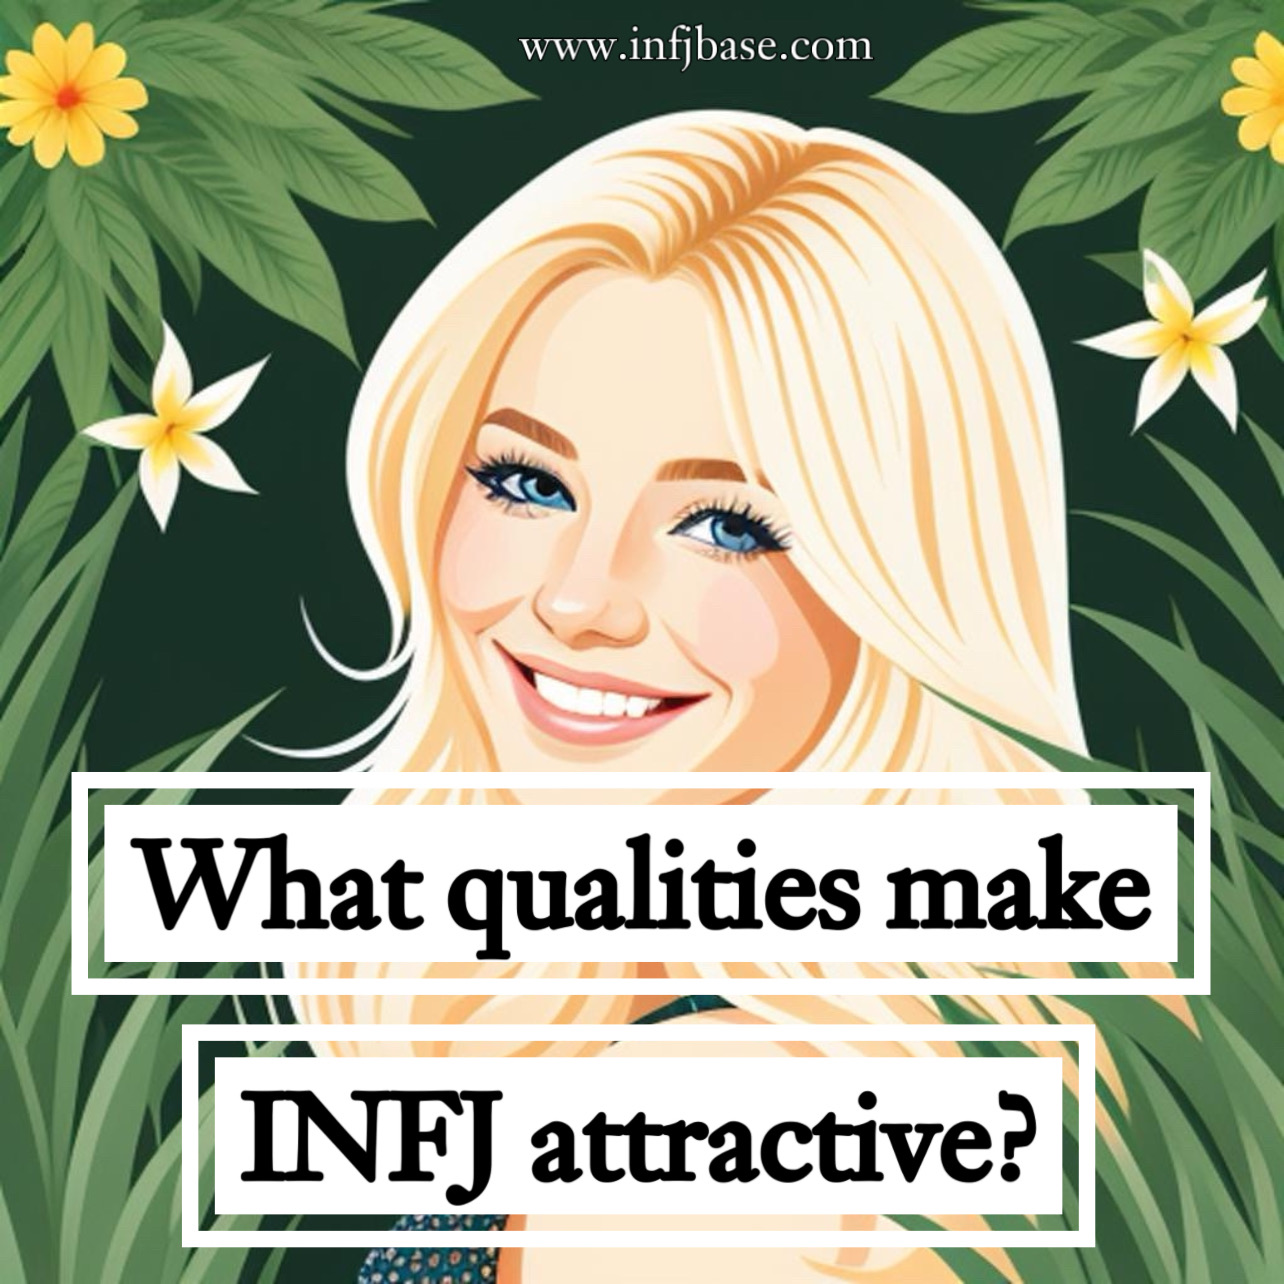 What qualities make INFJ attractive?